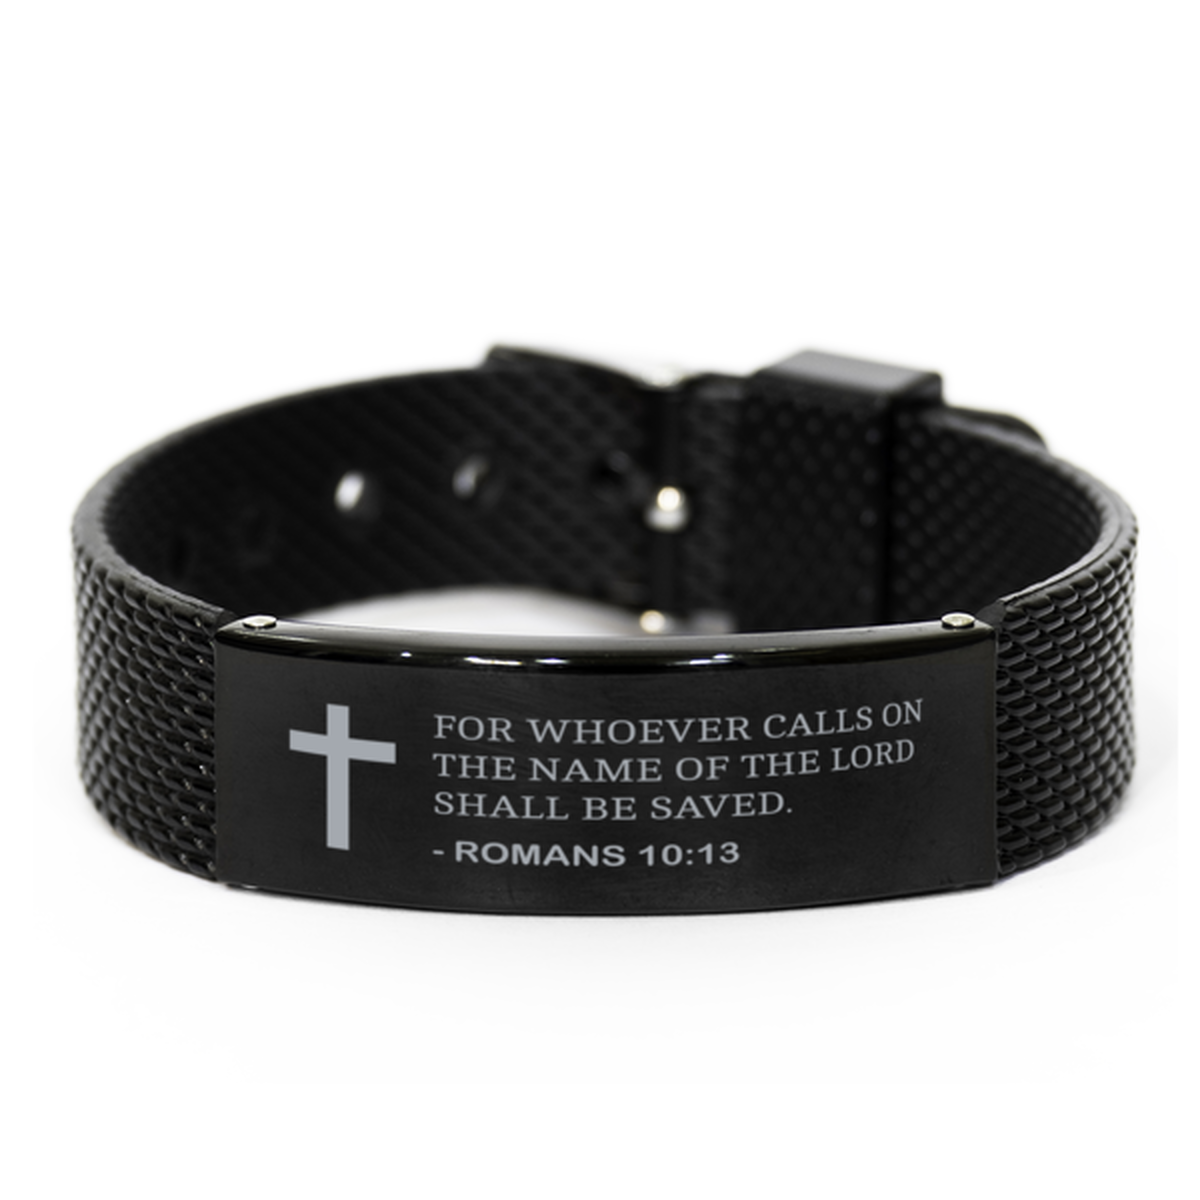 Christian Black Bracelet,, Romans 10:13 For Whoever Calls On The Name Of The Lord Shall, Motivational Bible Verse Gifts For Men Women